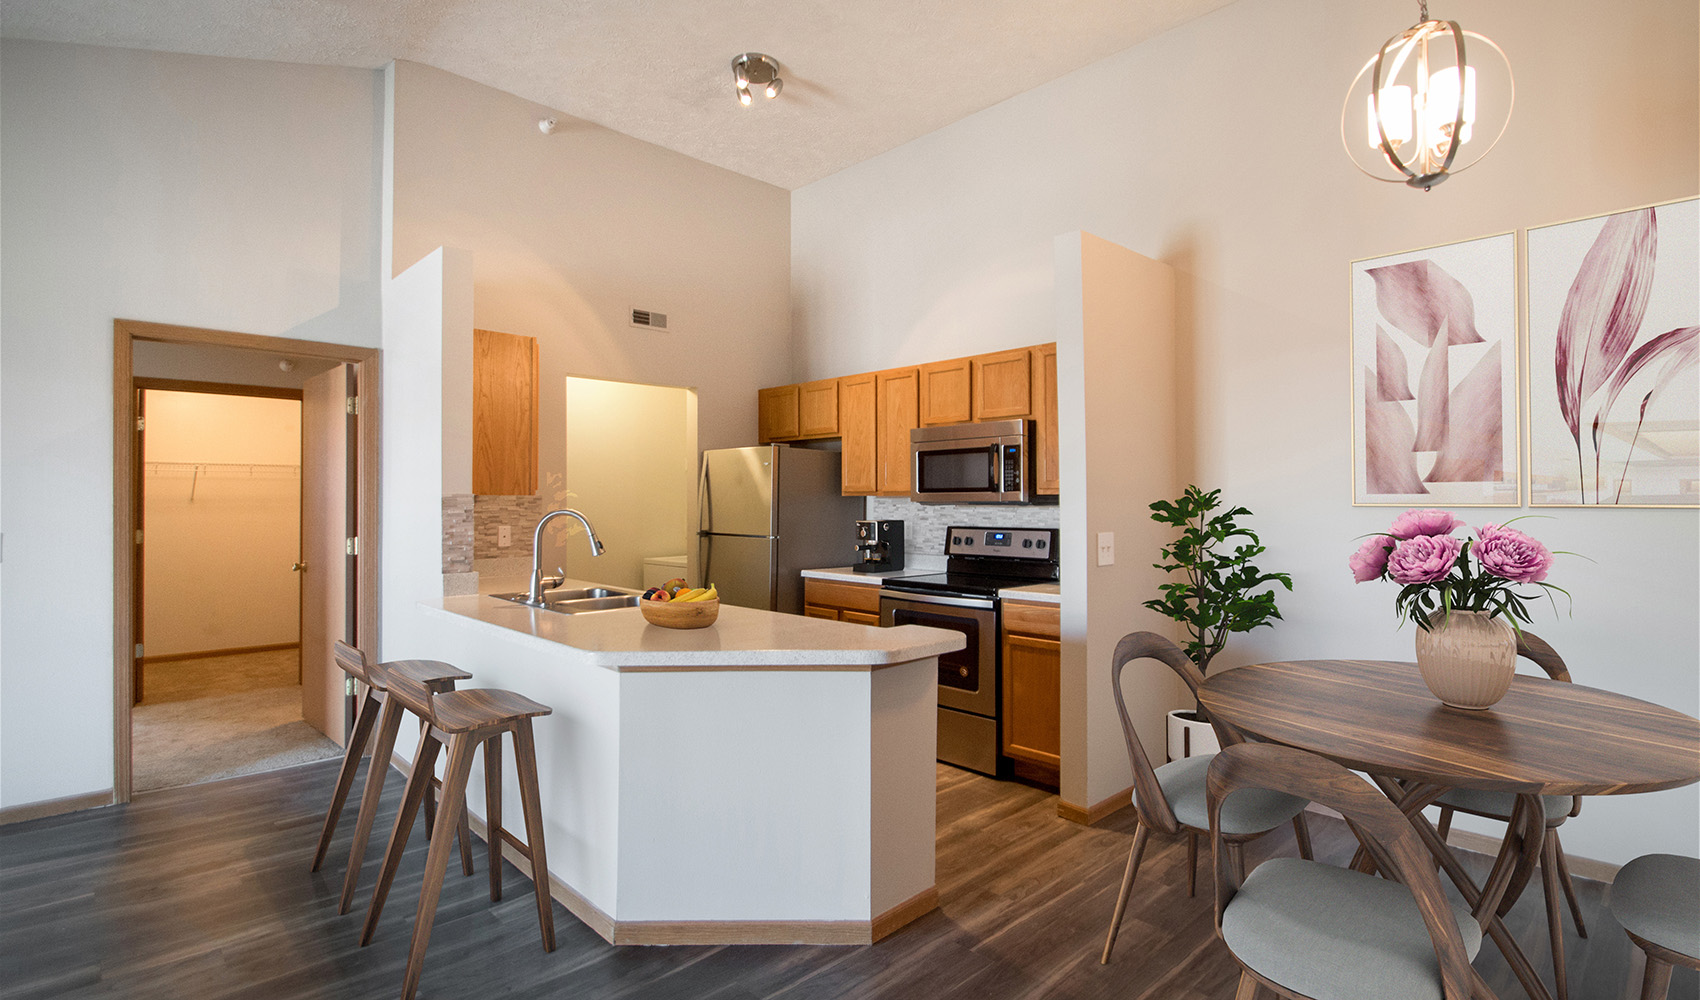 Kitchen And Dining Area in Fairfax Apartments